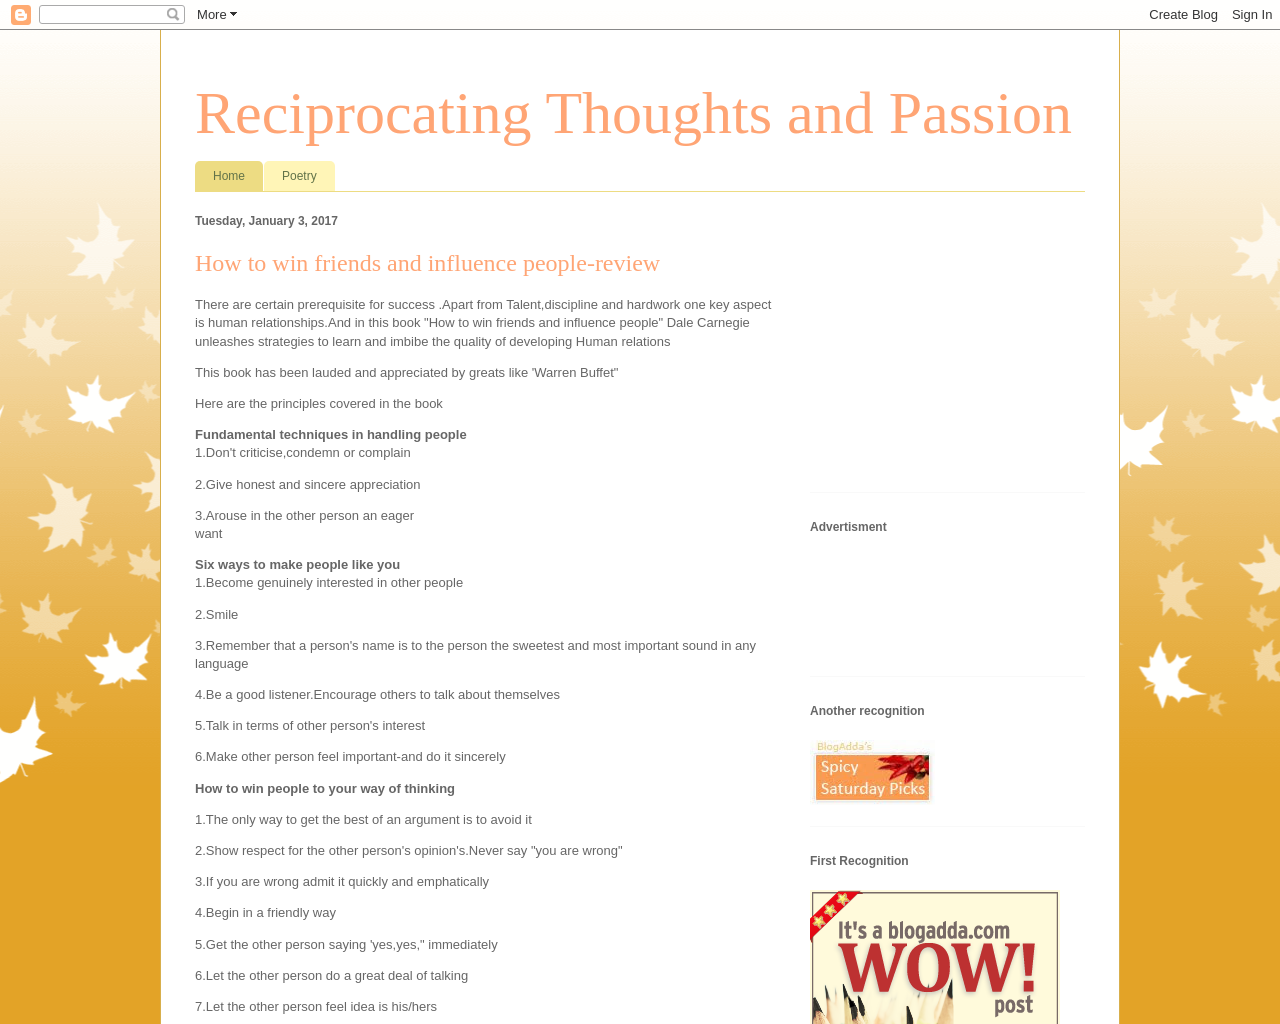 Reciprocating Thoughts and Passion